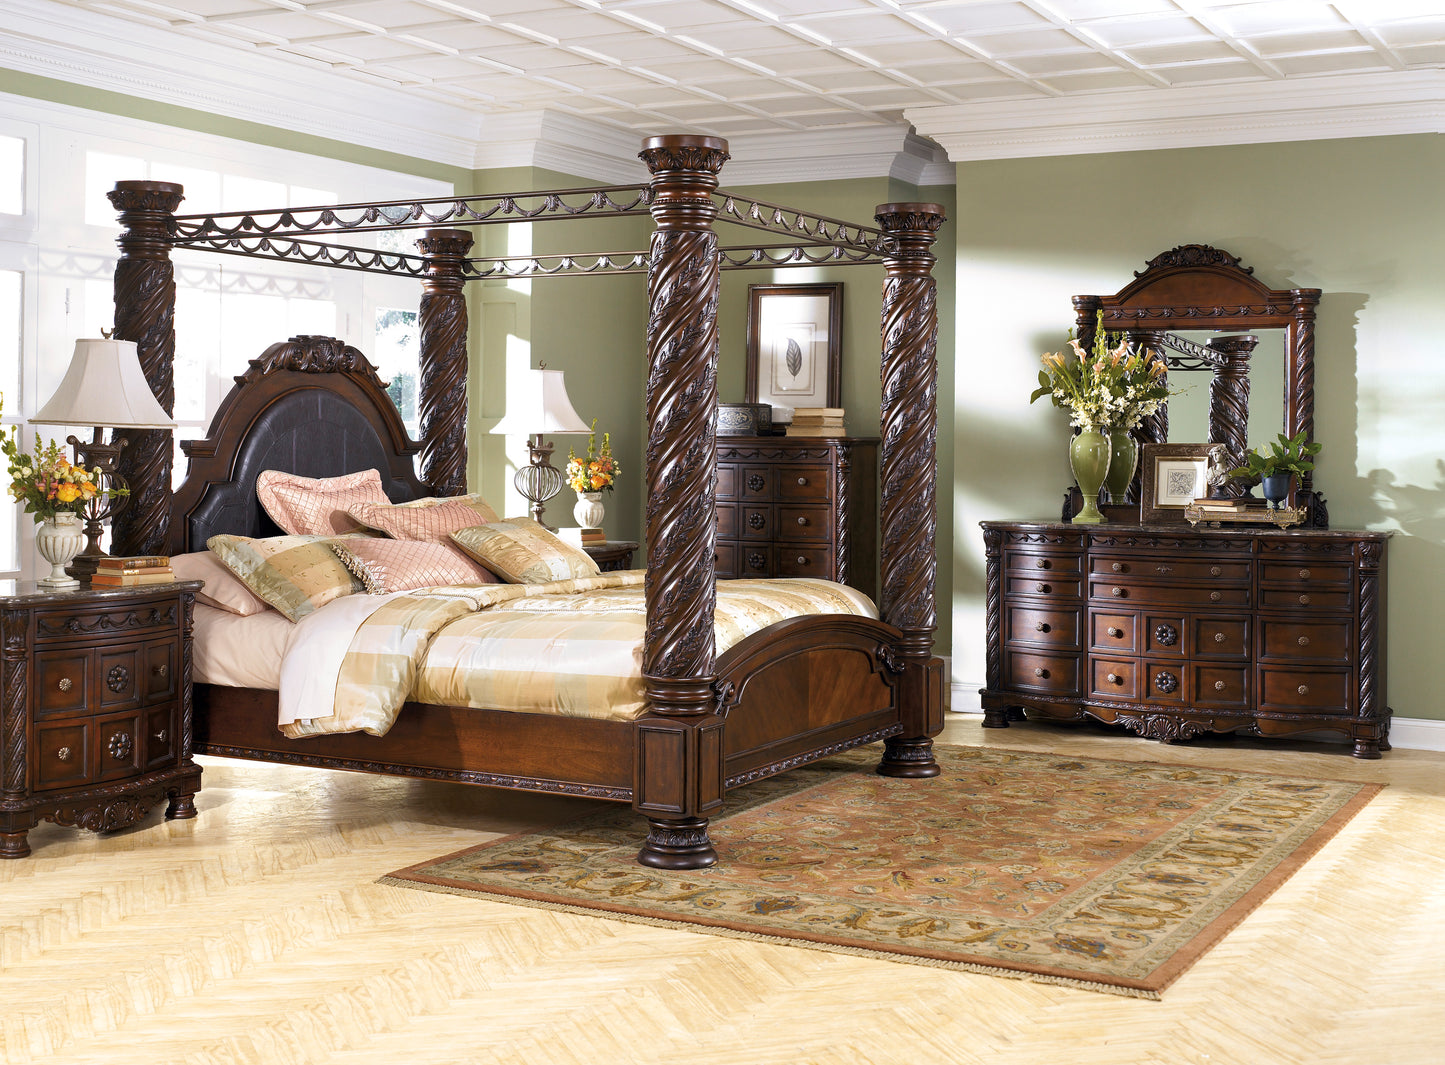 Ashley North Shore 4PC Bedroom Set Cal king Poster Canopy Bed Dresser Mirror One Nightstand in Dark Brown